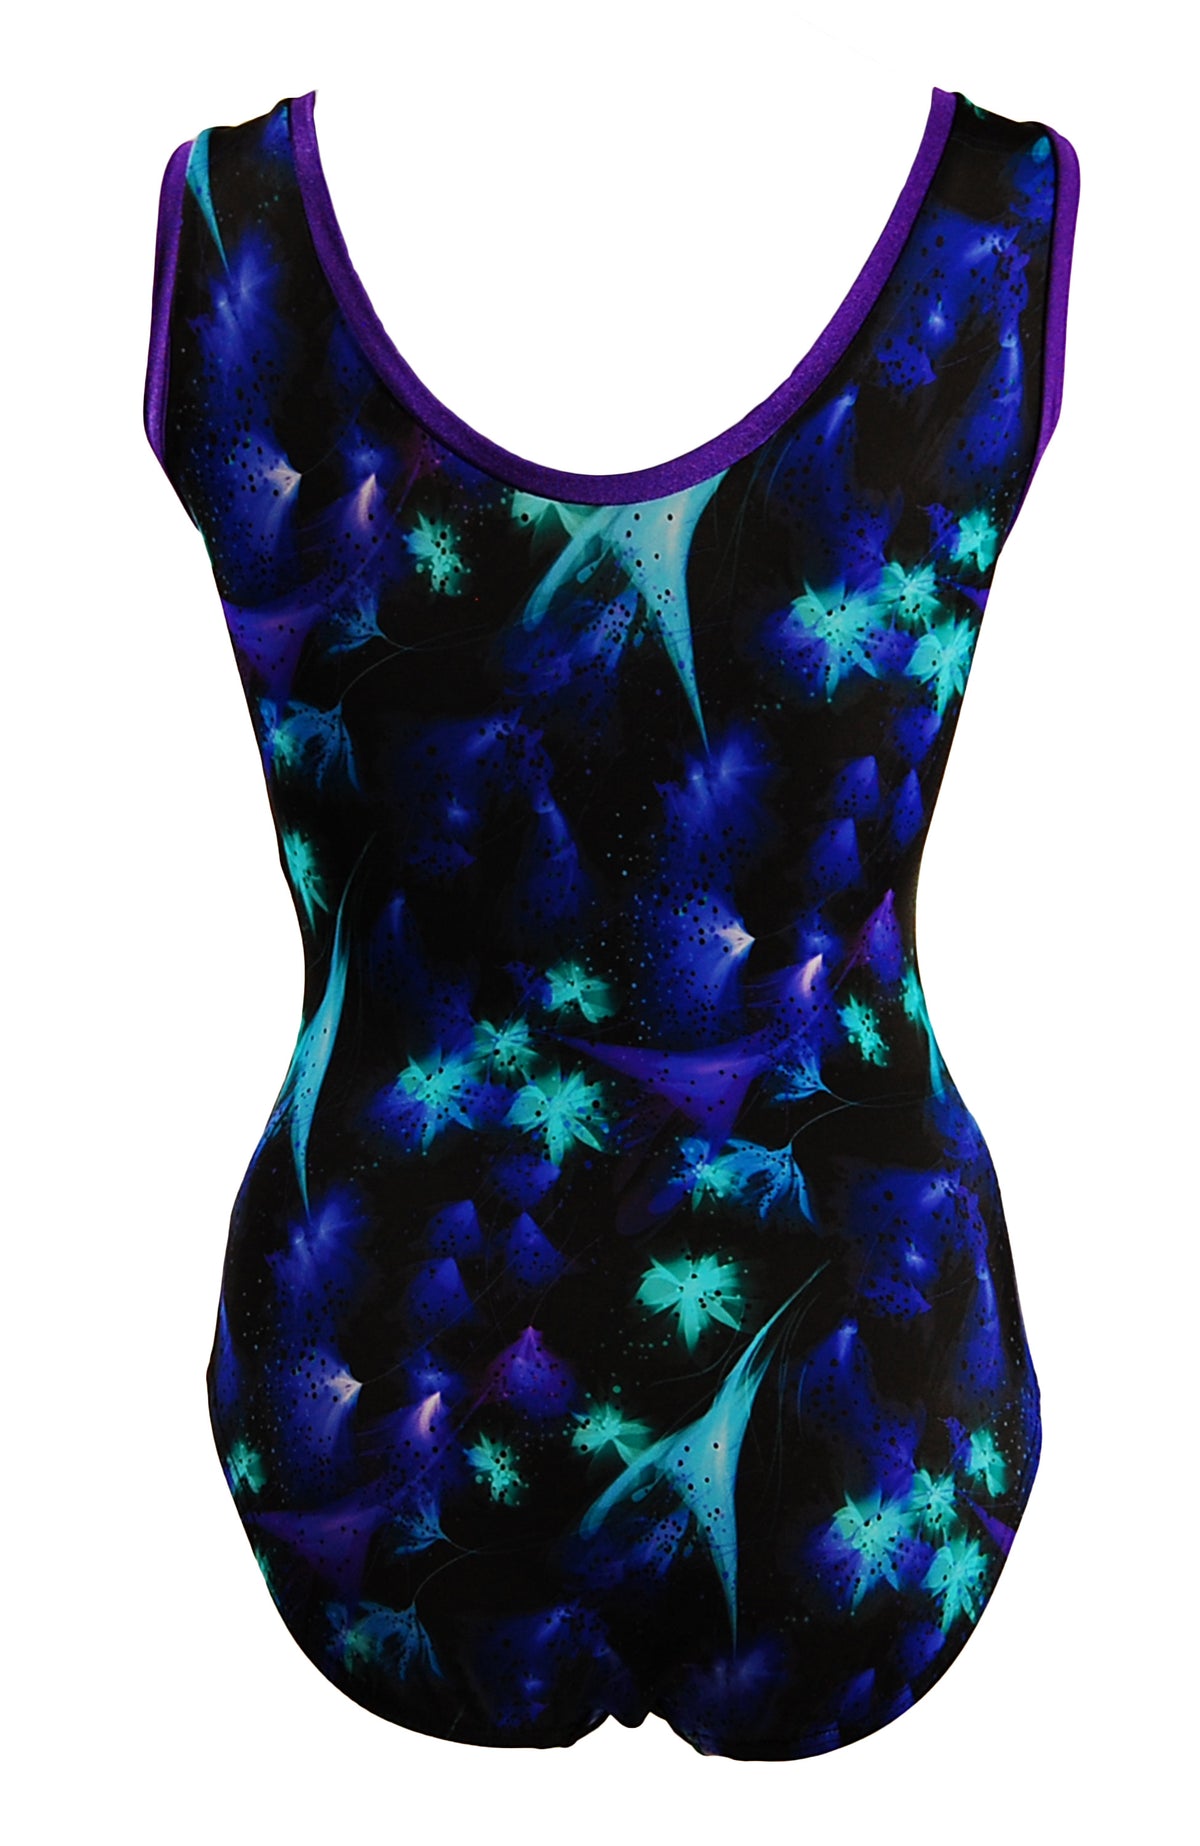 Back view of tank style leotard black/purple/turquoise 